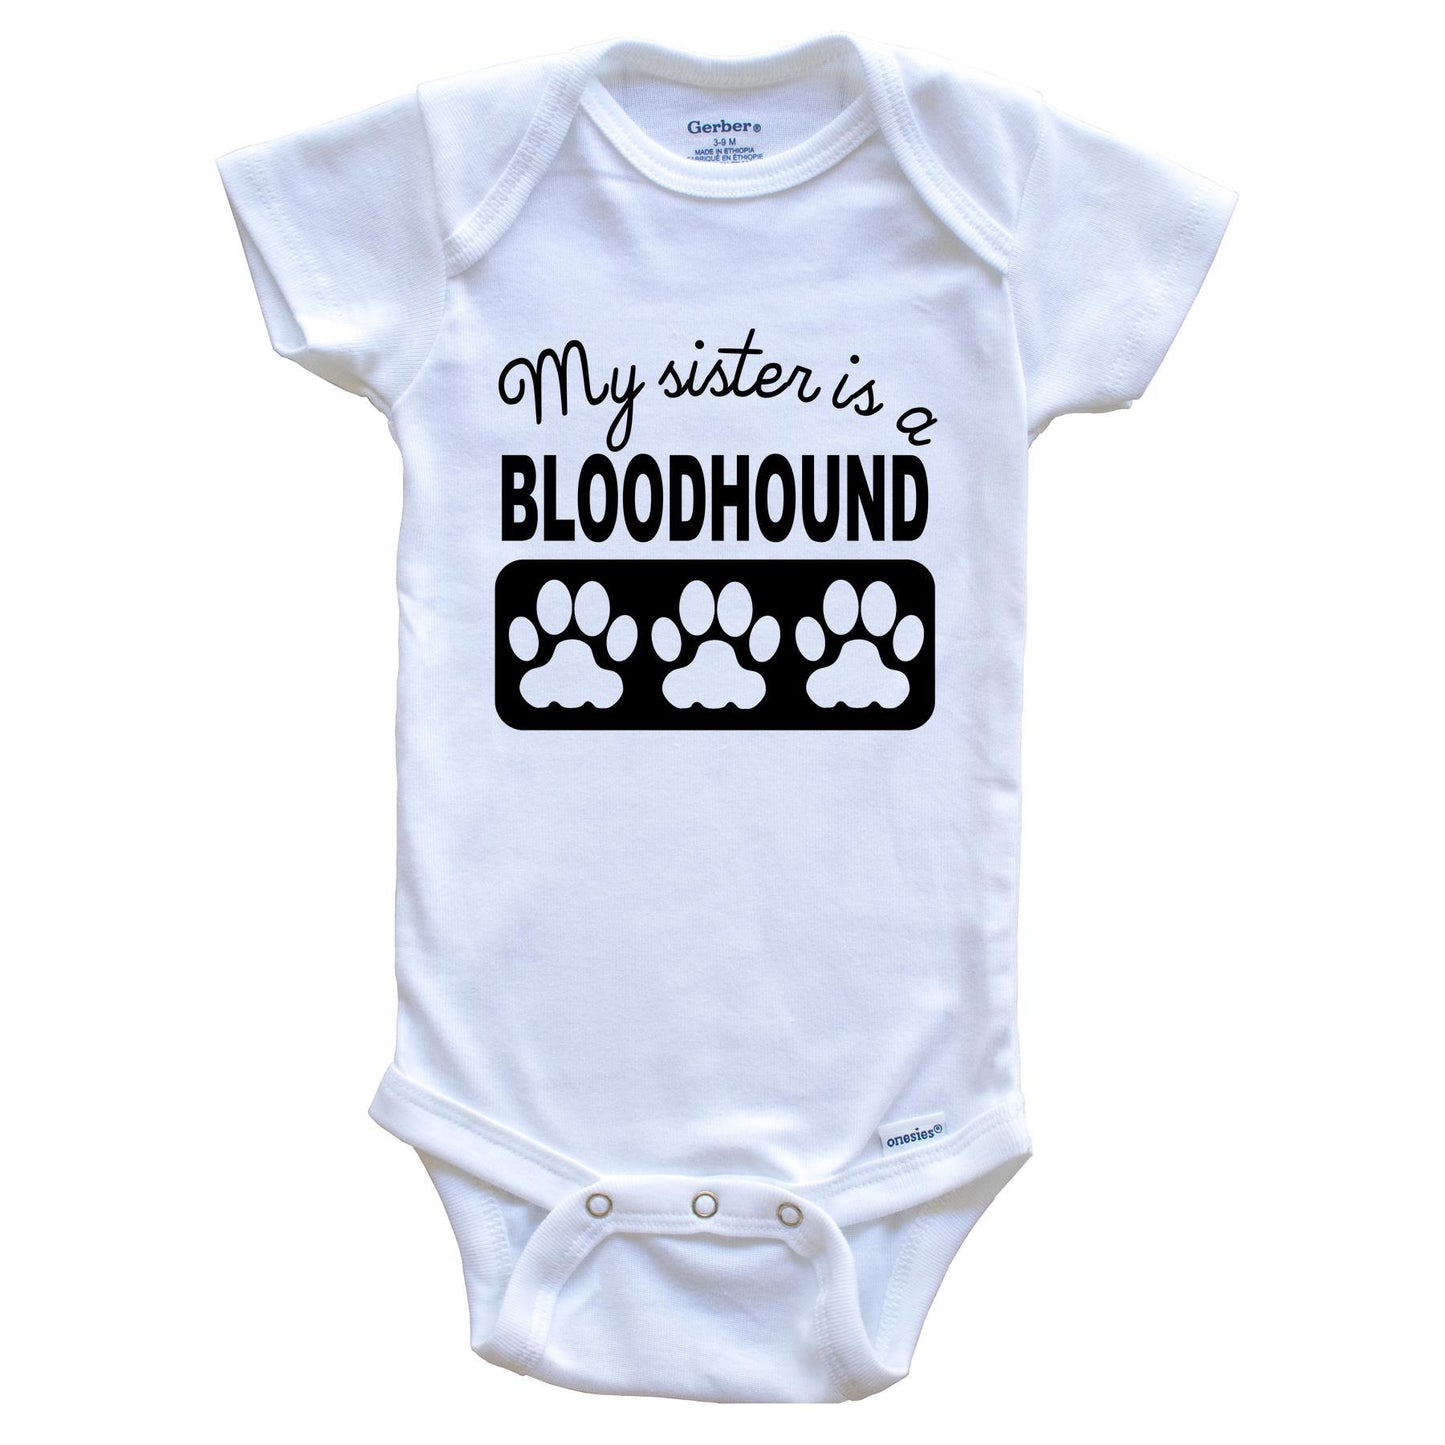 My Sister Is A Bloodhound Baby Onesie